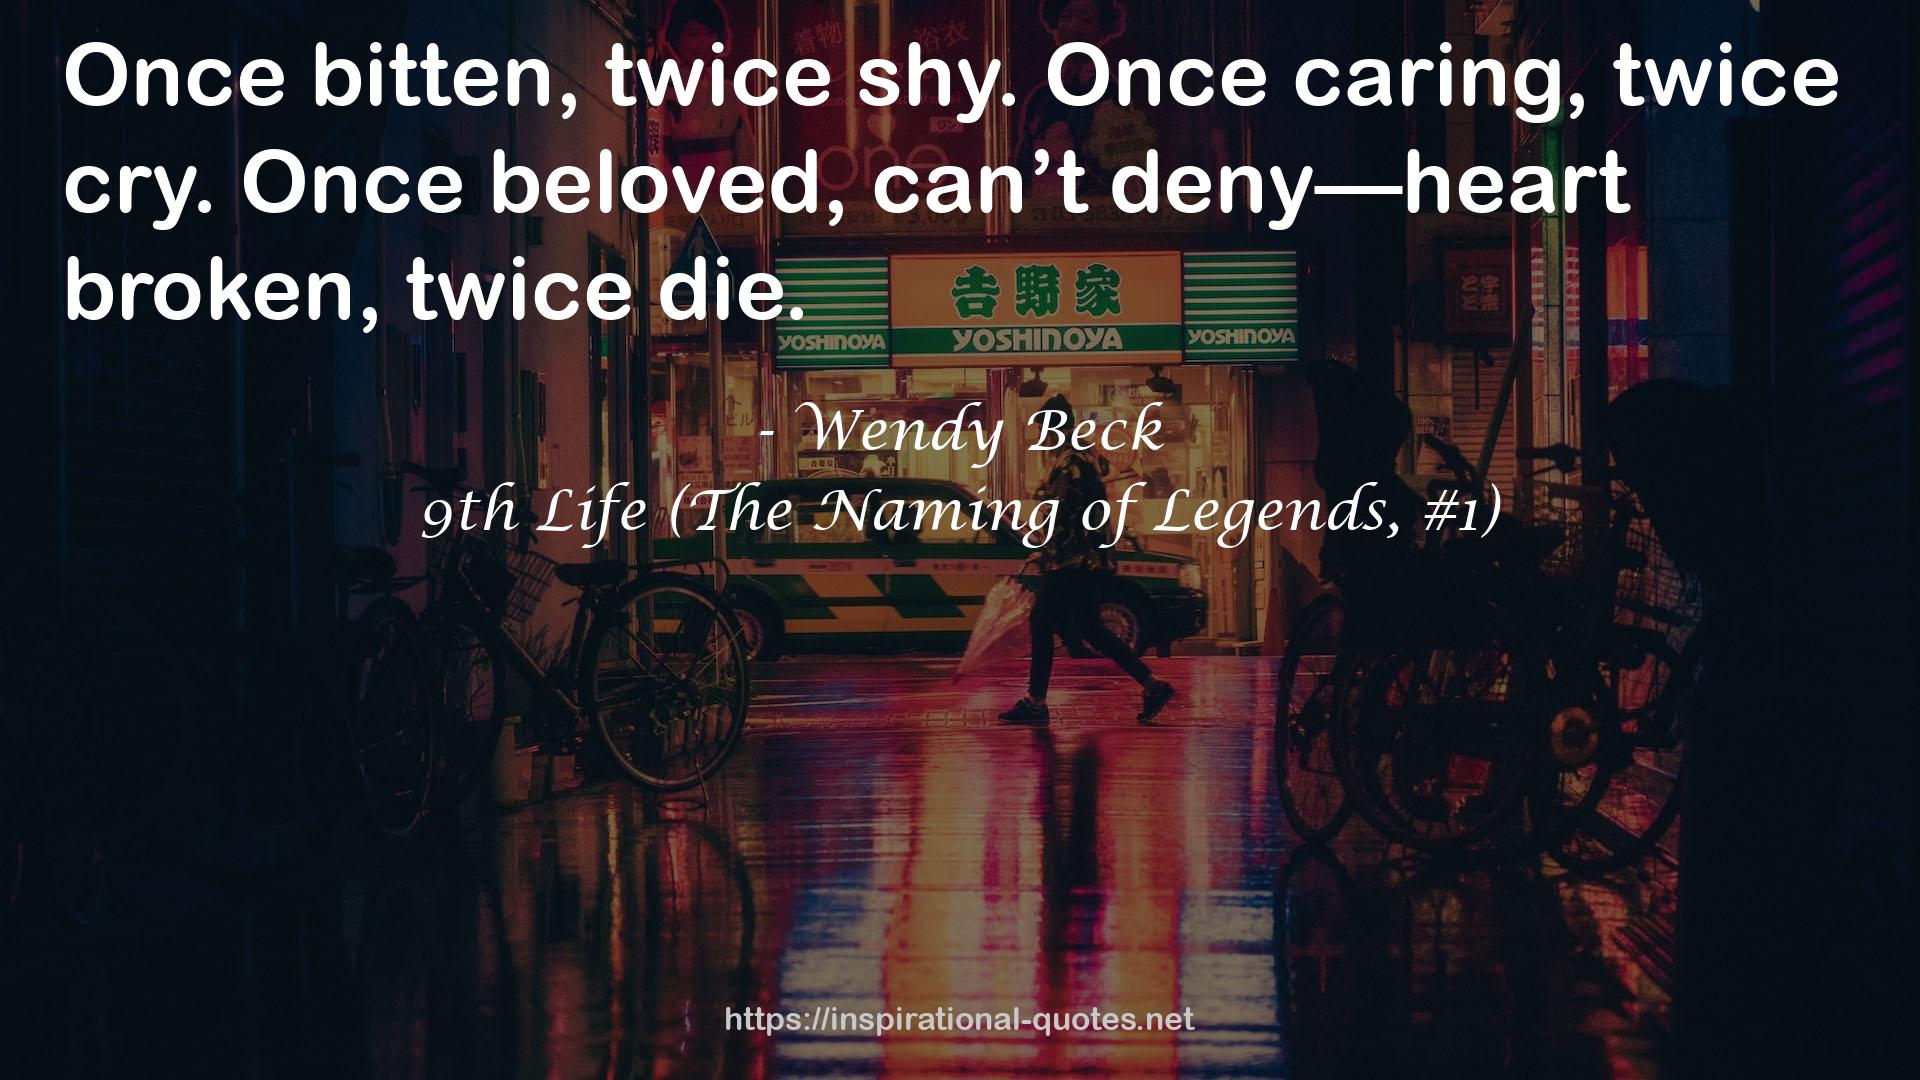 9th Life (The Naming of Legends, #1) QUOTES